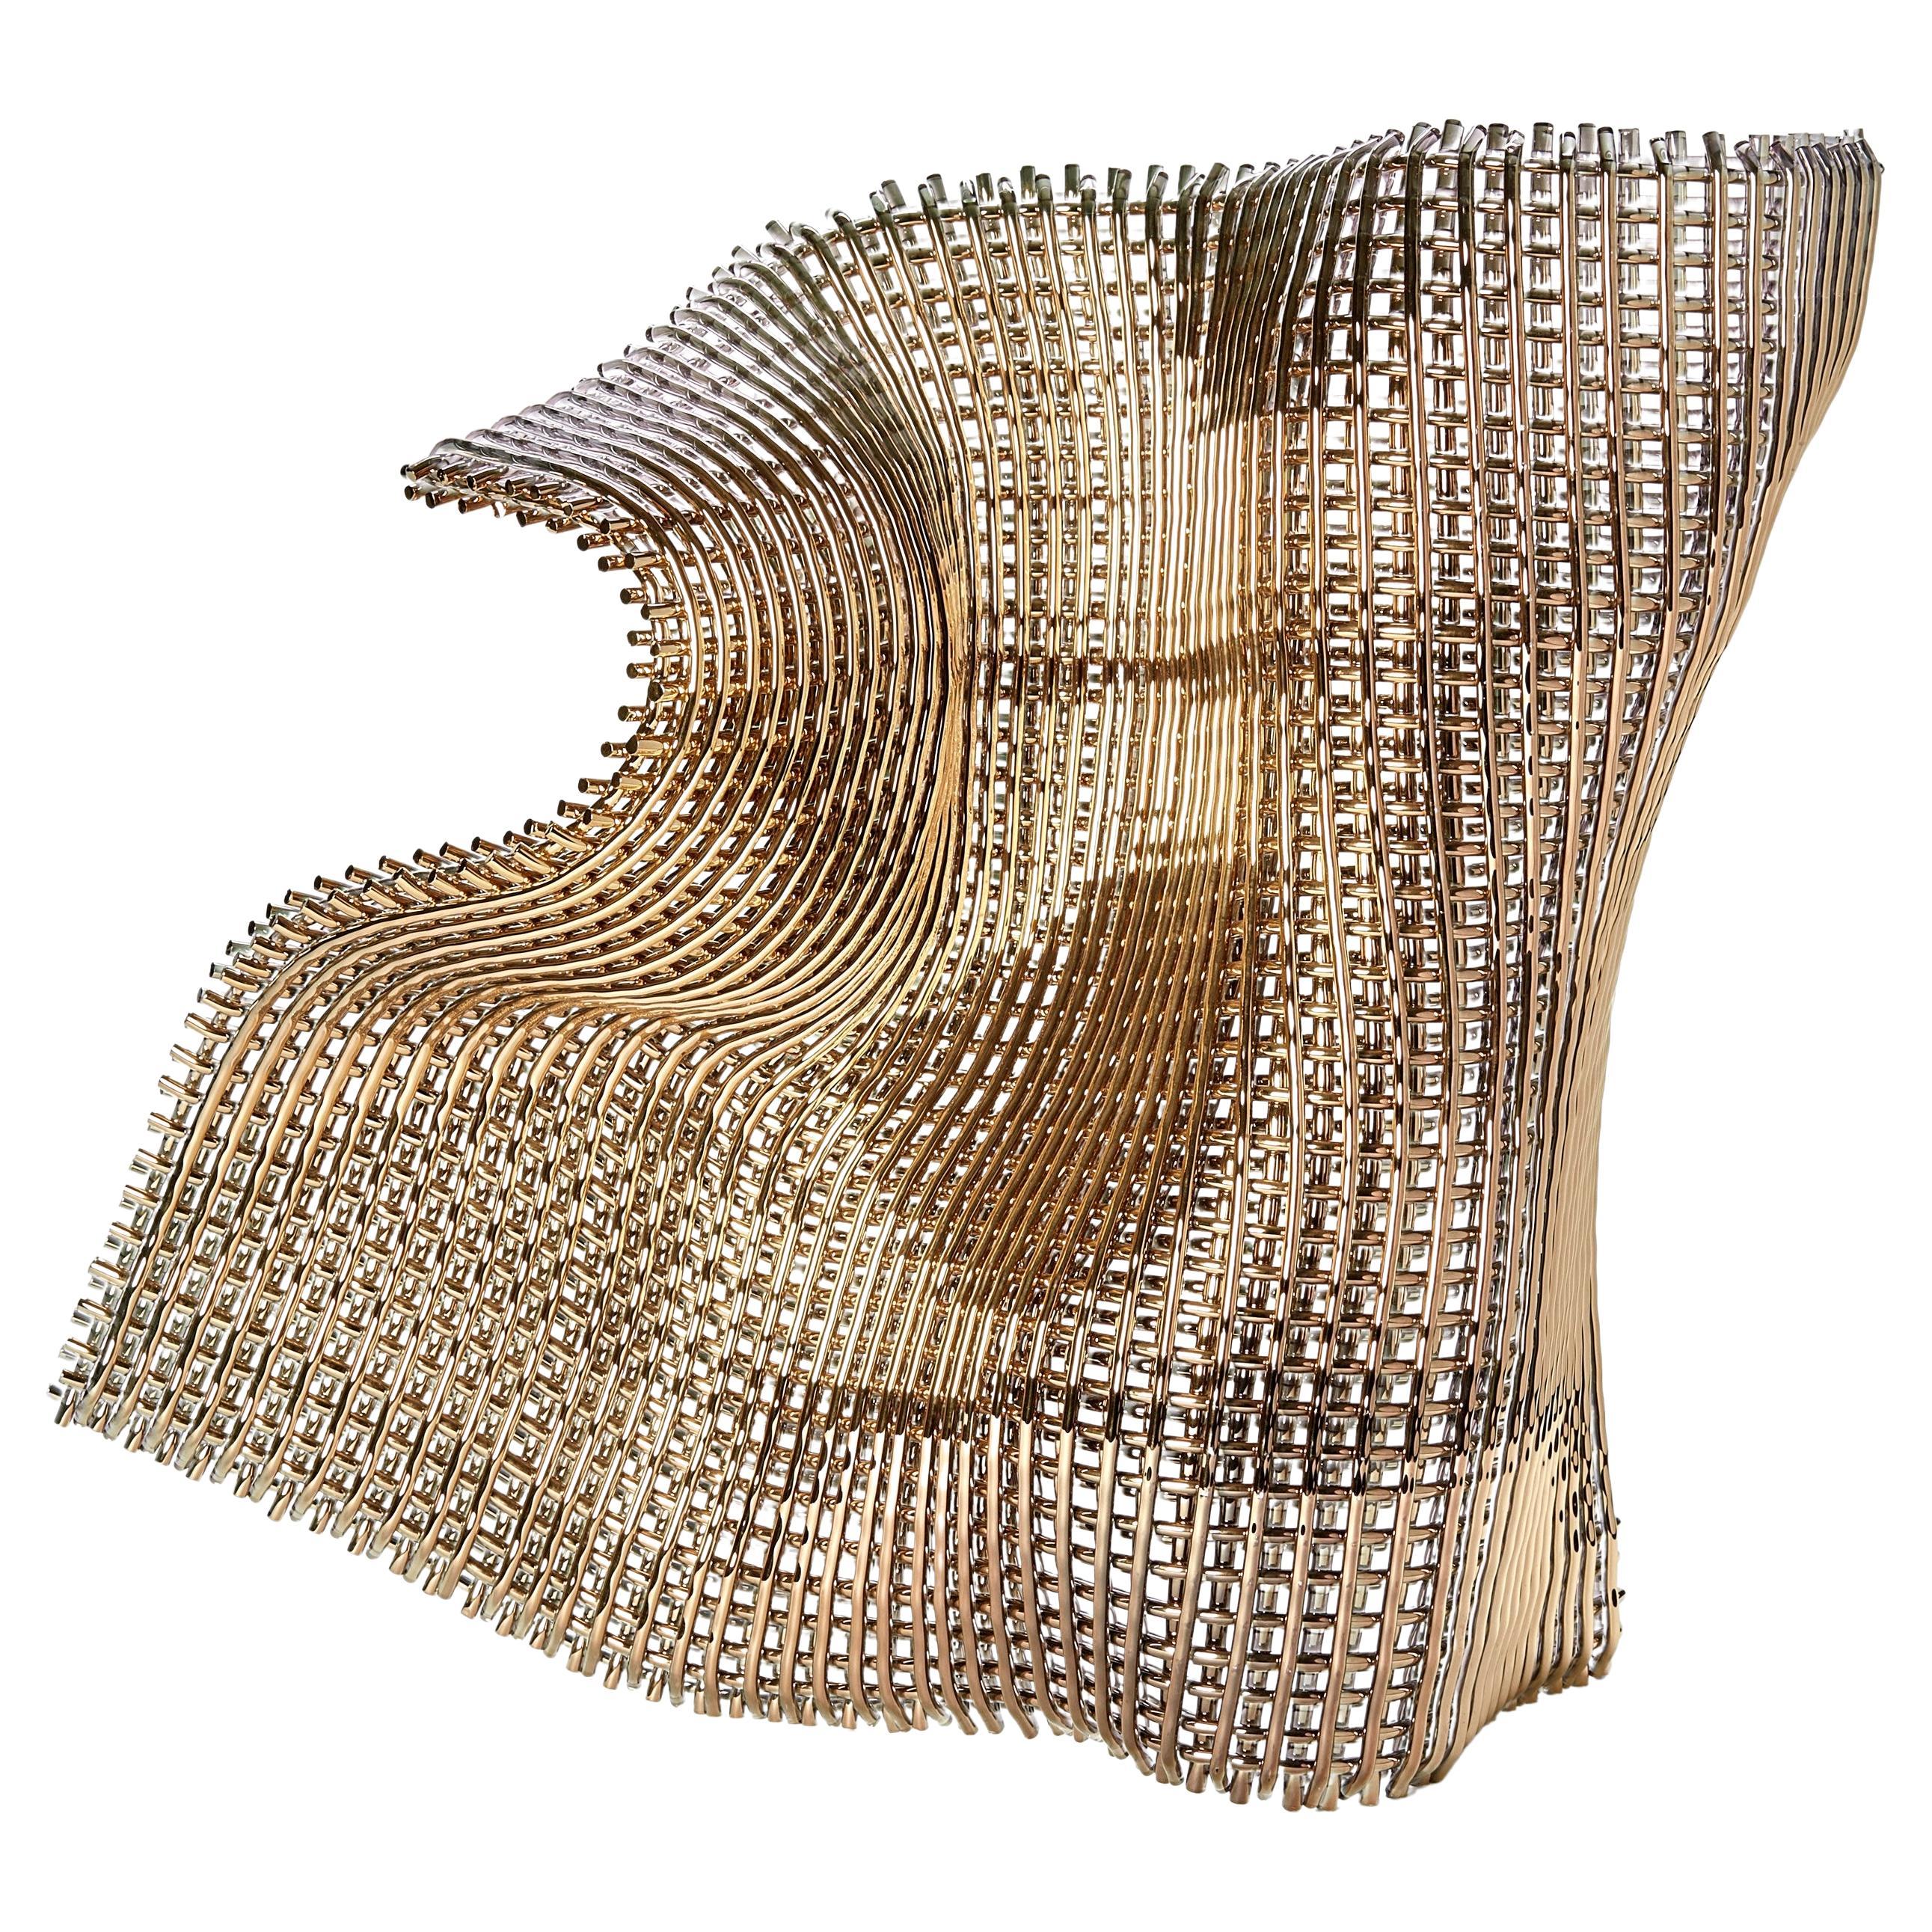 Masquerade, a woven gold & glass standing abstract sculpture by Cathryn Shilling